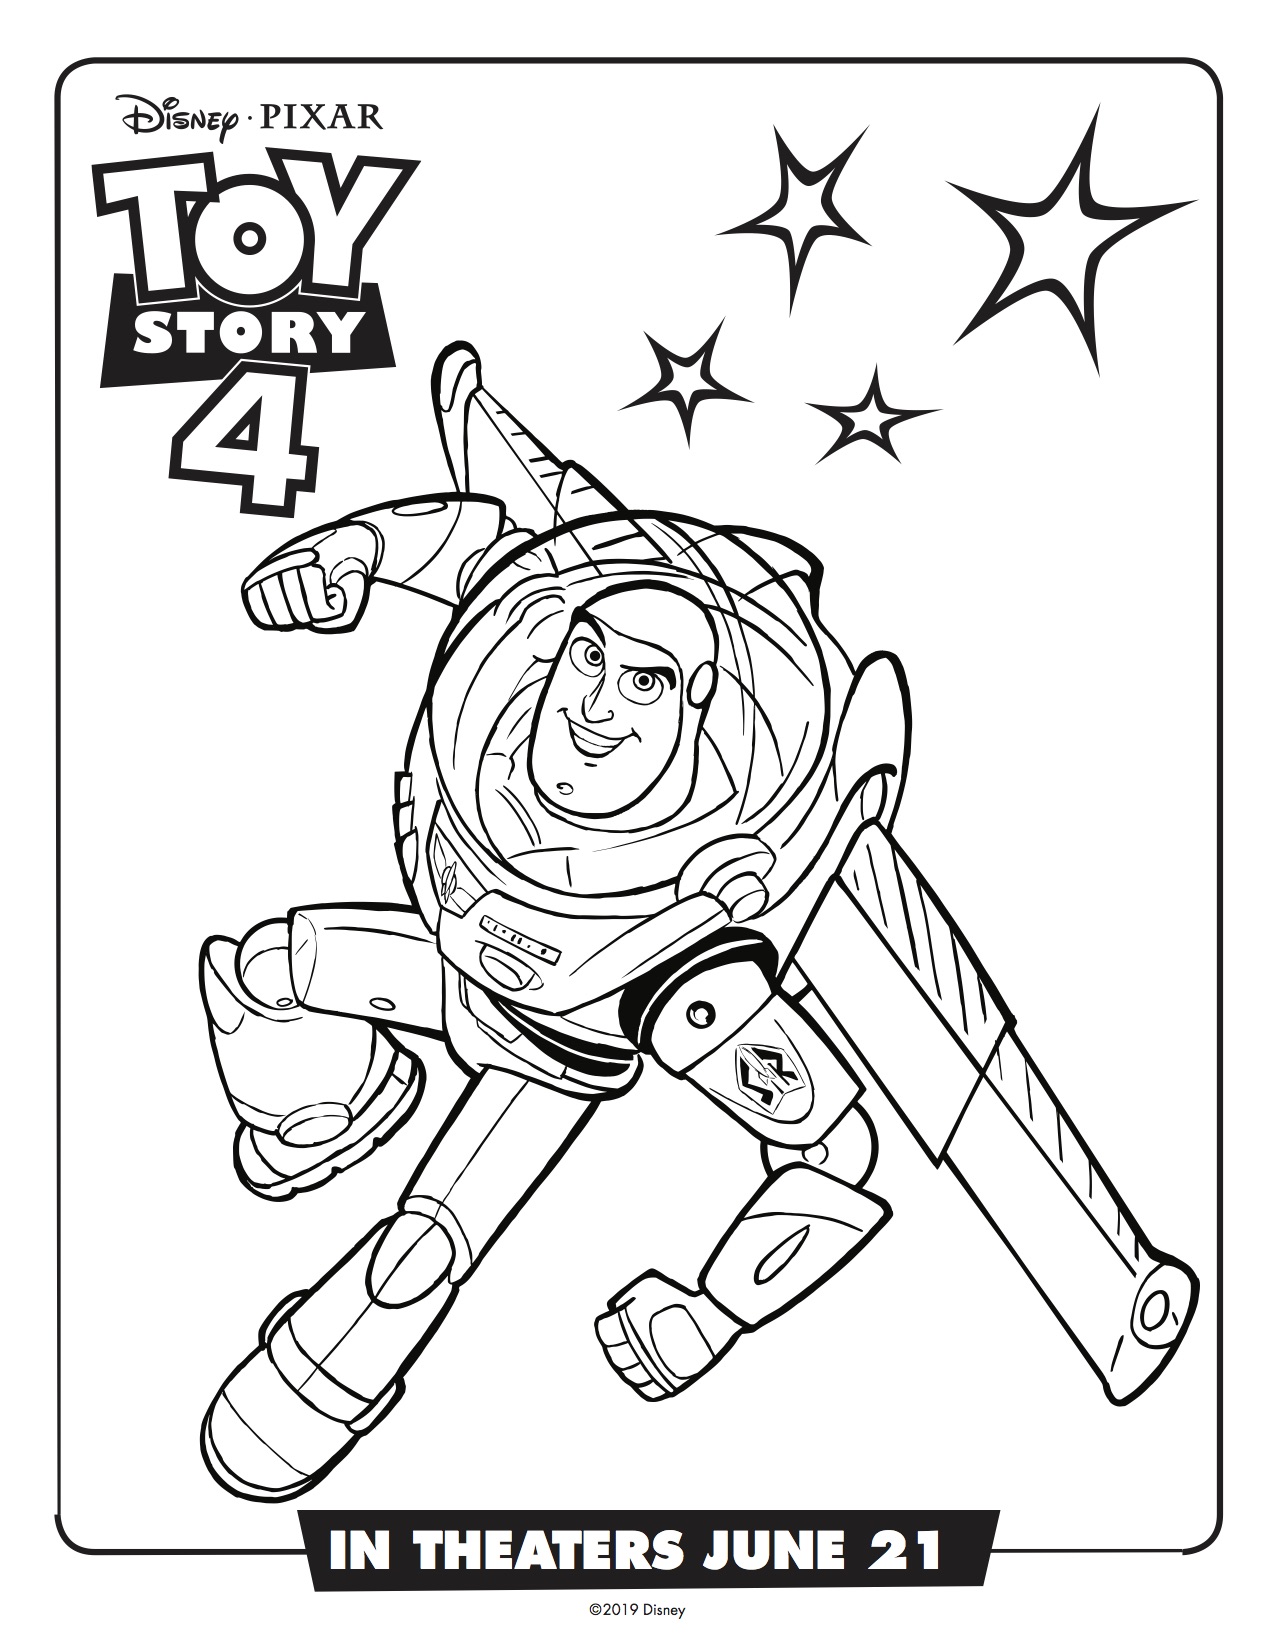 toy-story-4-buzz-lightyear-printable-coloring-page-simply-sweet-days